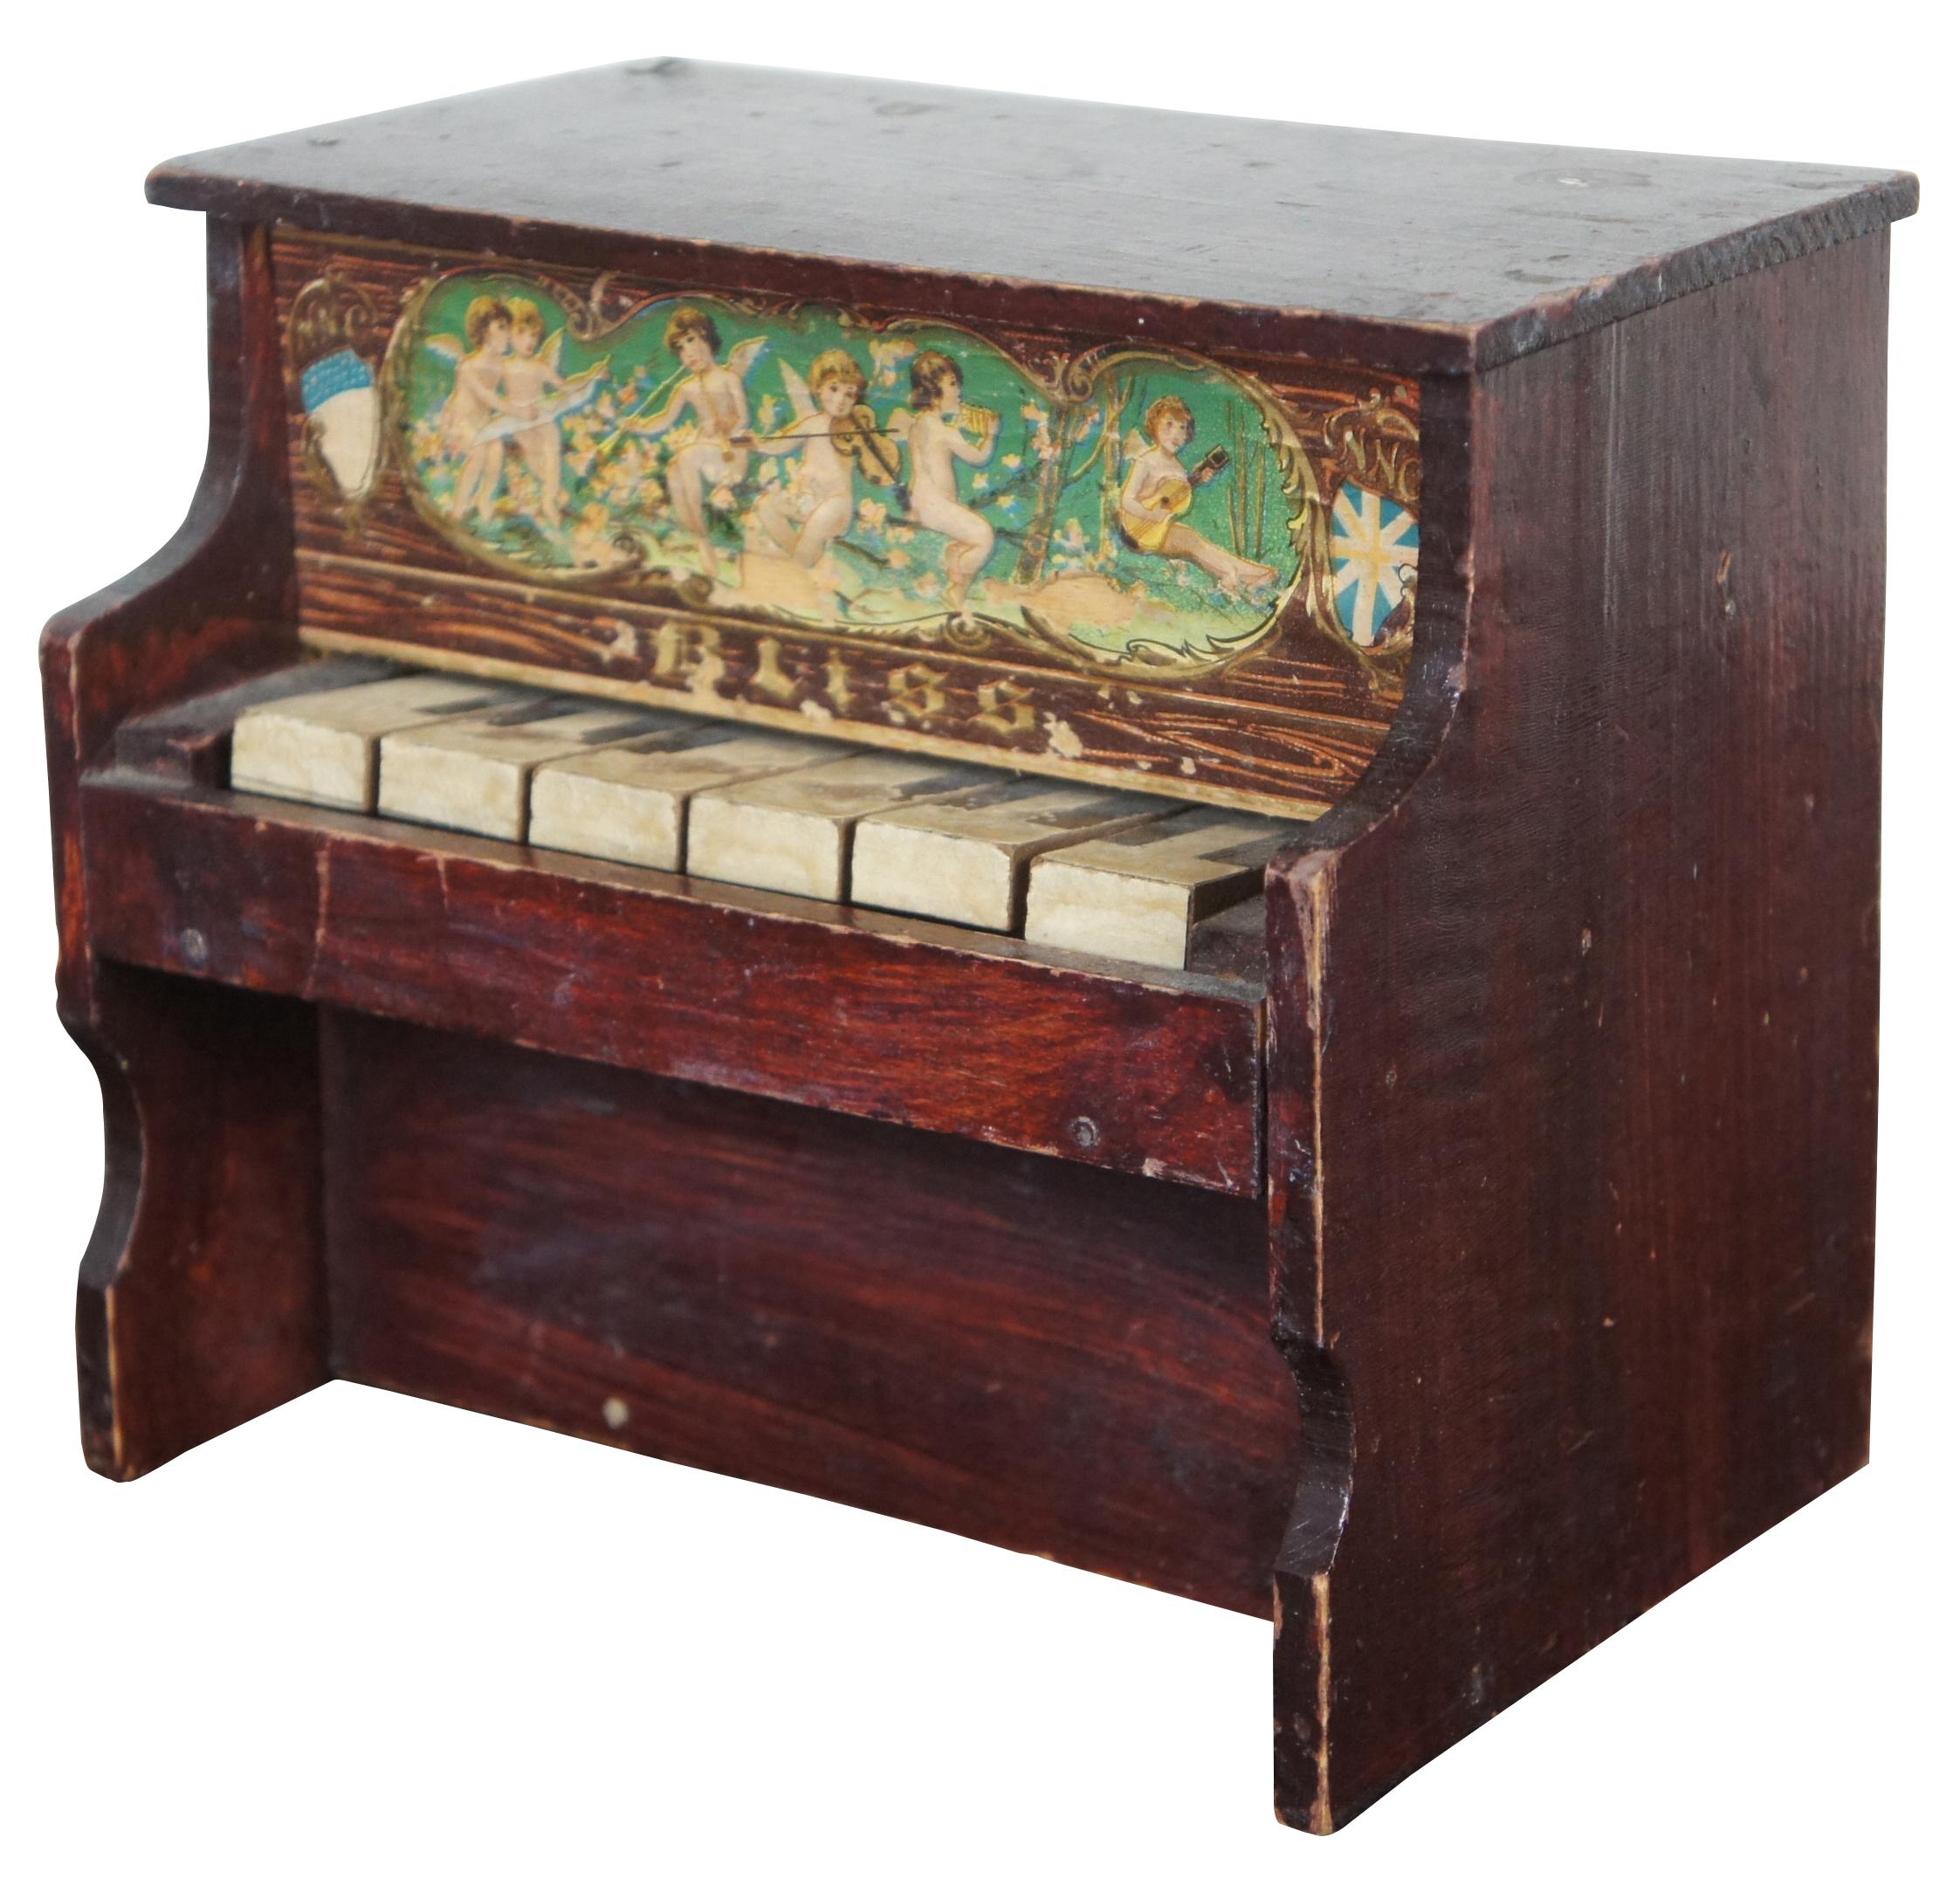 Antique German Bliss toy piano with a six note glockenspiel and lithograph image of cherubs playing instruments. Measure: 7